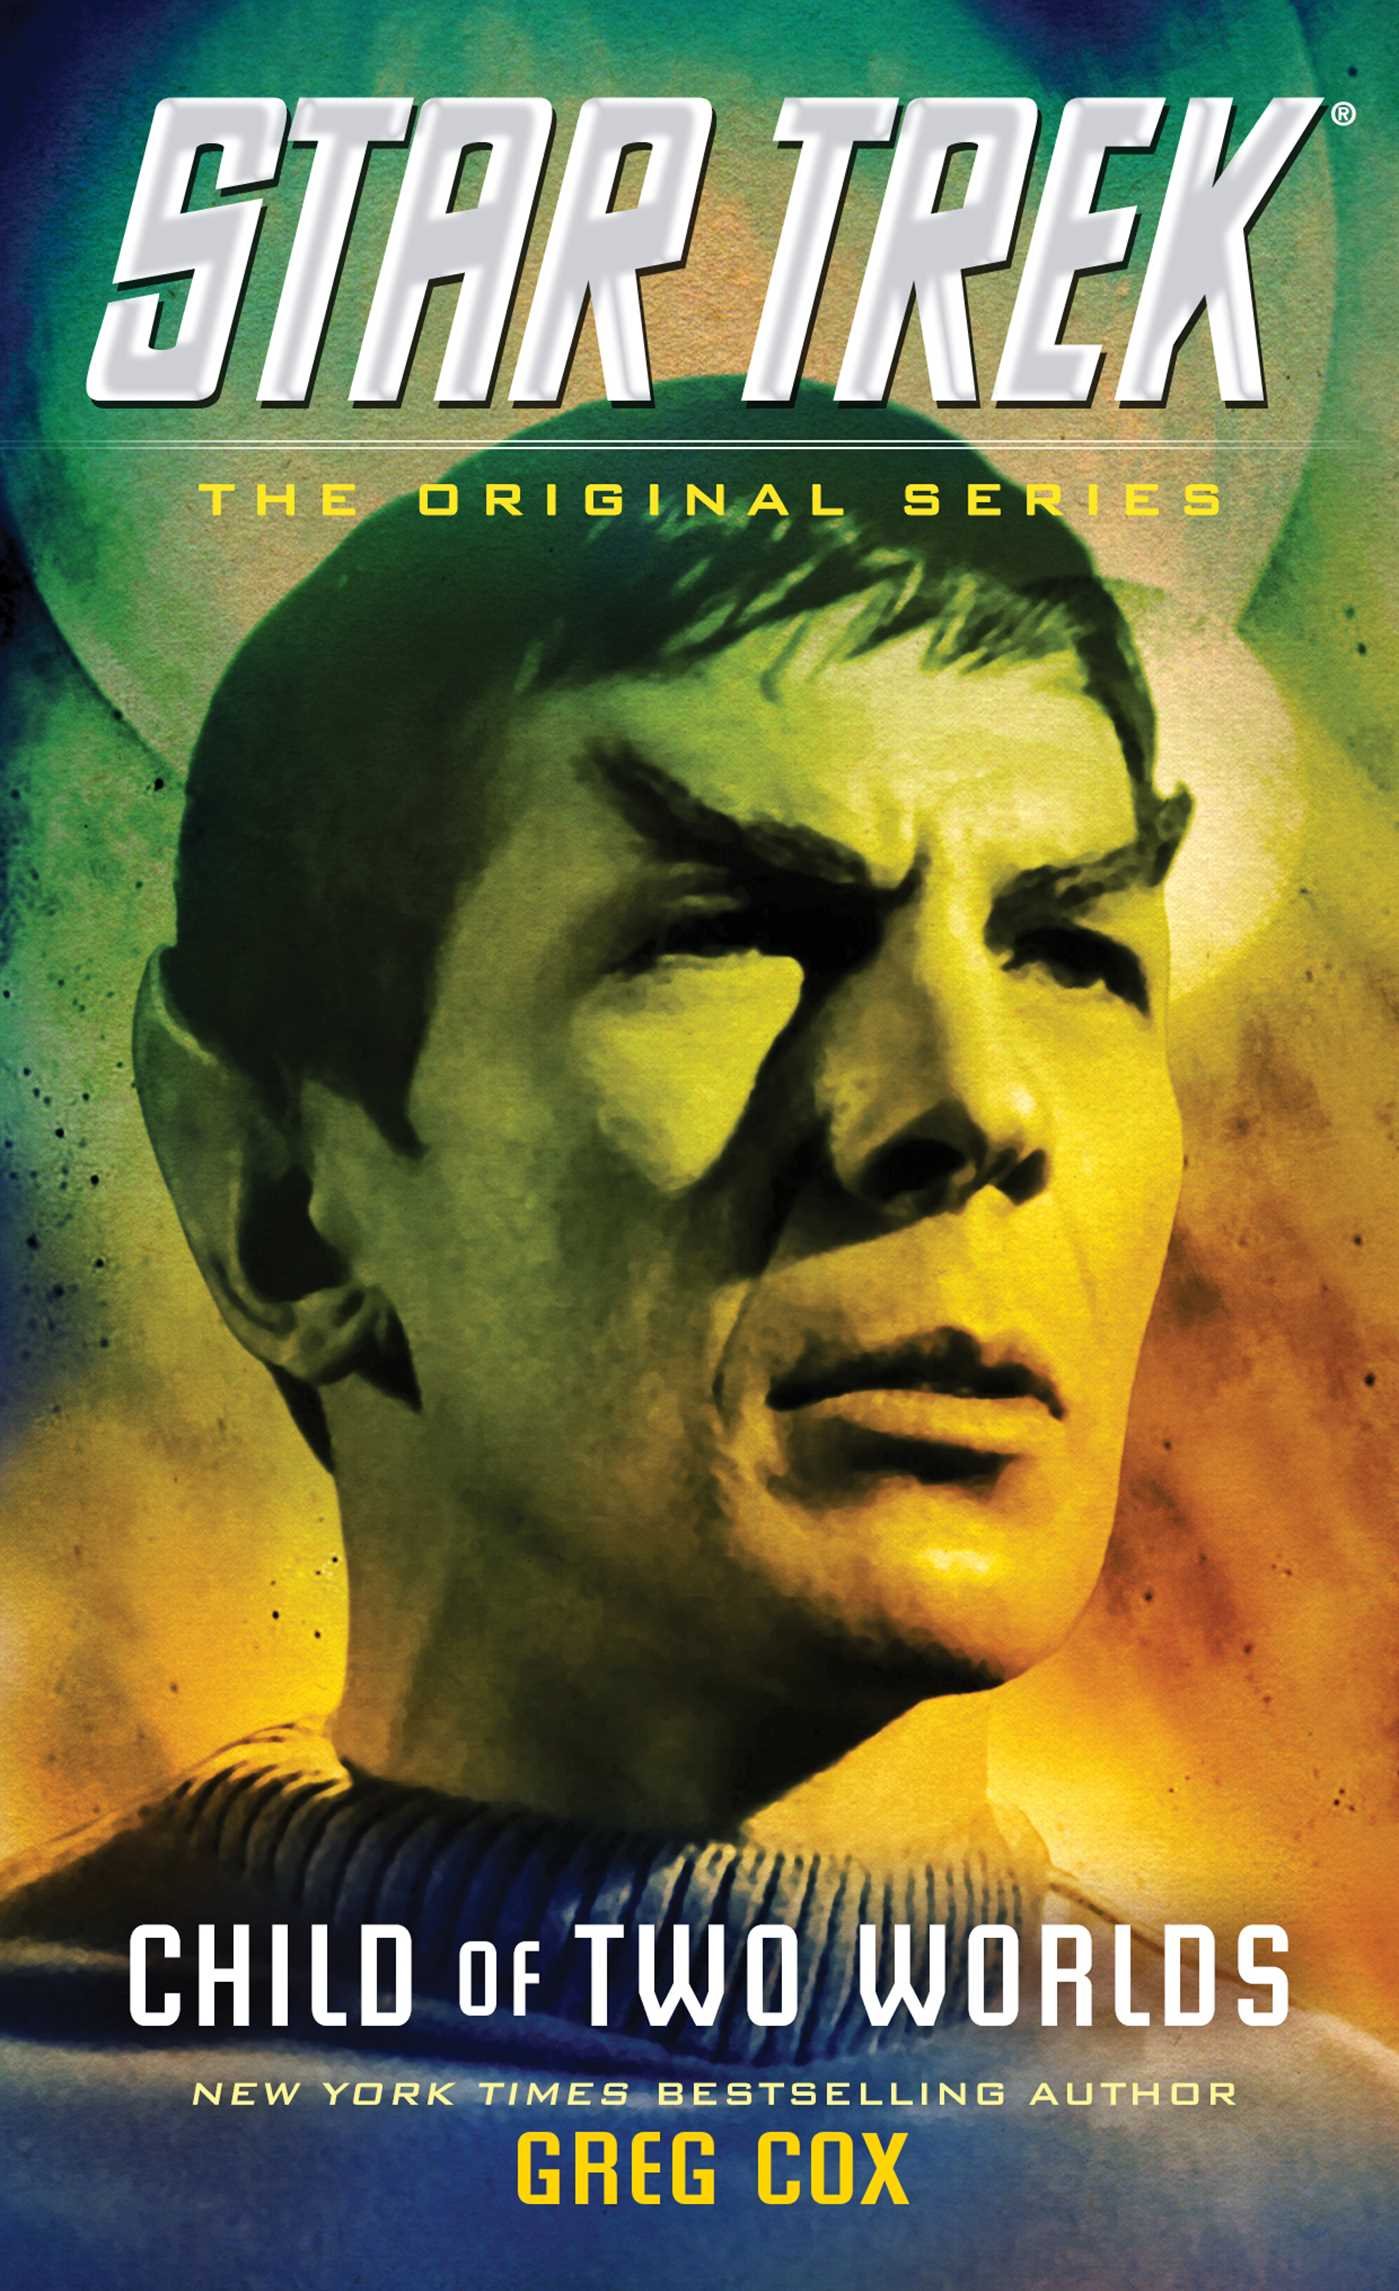 “Star Trek: The Original Series: Child of Two Worlds” Review by Motionpicturescomics.com